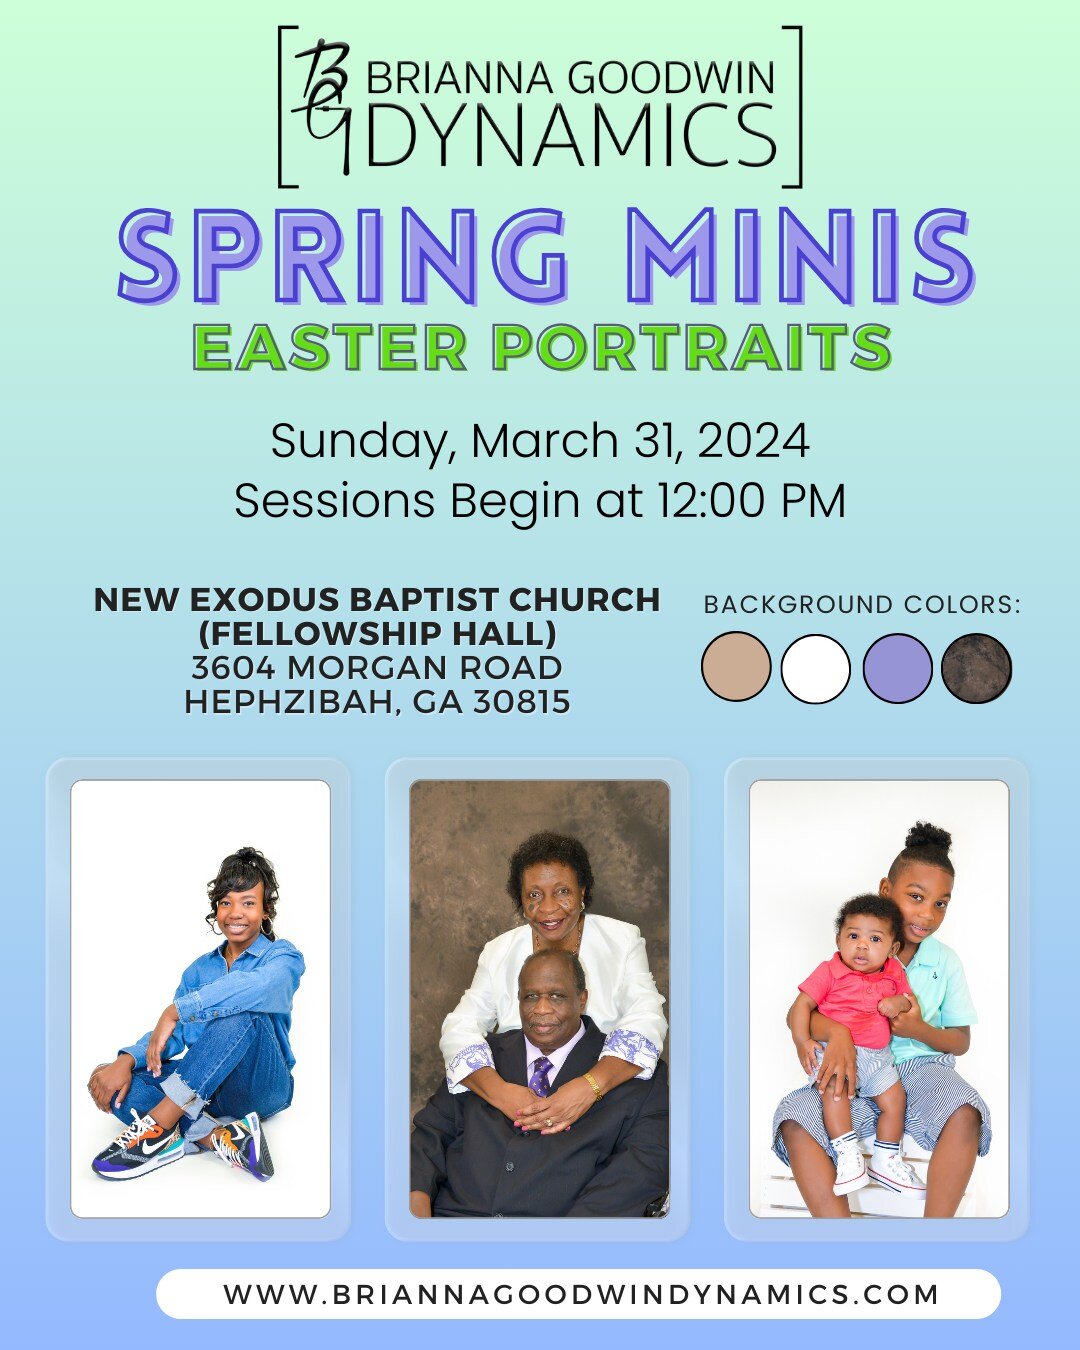 It&rsquo;s that time again for Spring Minis! 🌷🌼
This year, I will be back at New Exodus Baptist Church for Easter Portraits on Sunday, March 31, 2024! Comment &lsquo;MORE INFO&rsquo; or send me a message for details.
BOOK NOW ⚡️
www.briannagoodwind